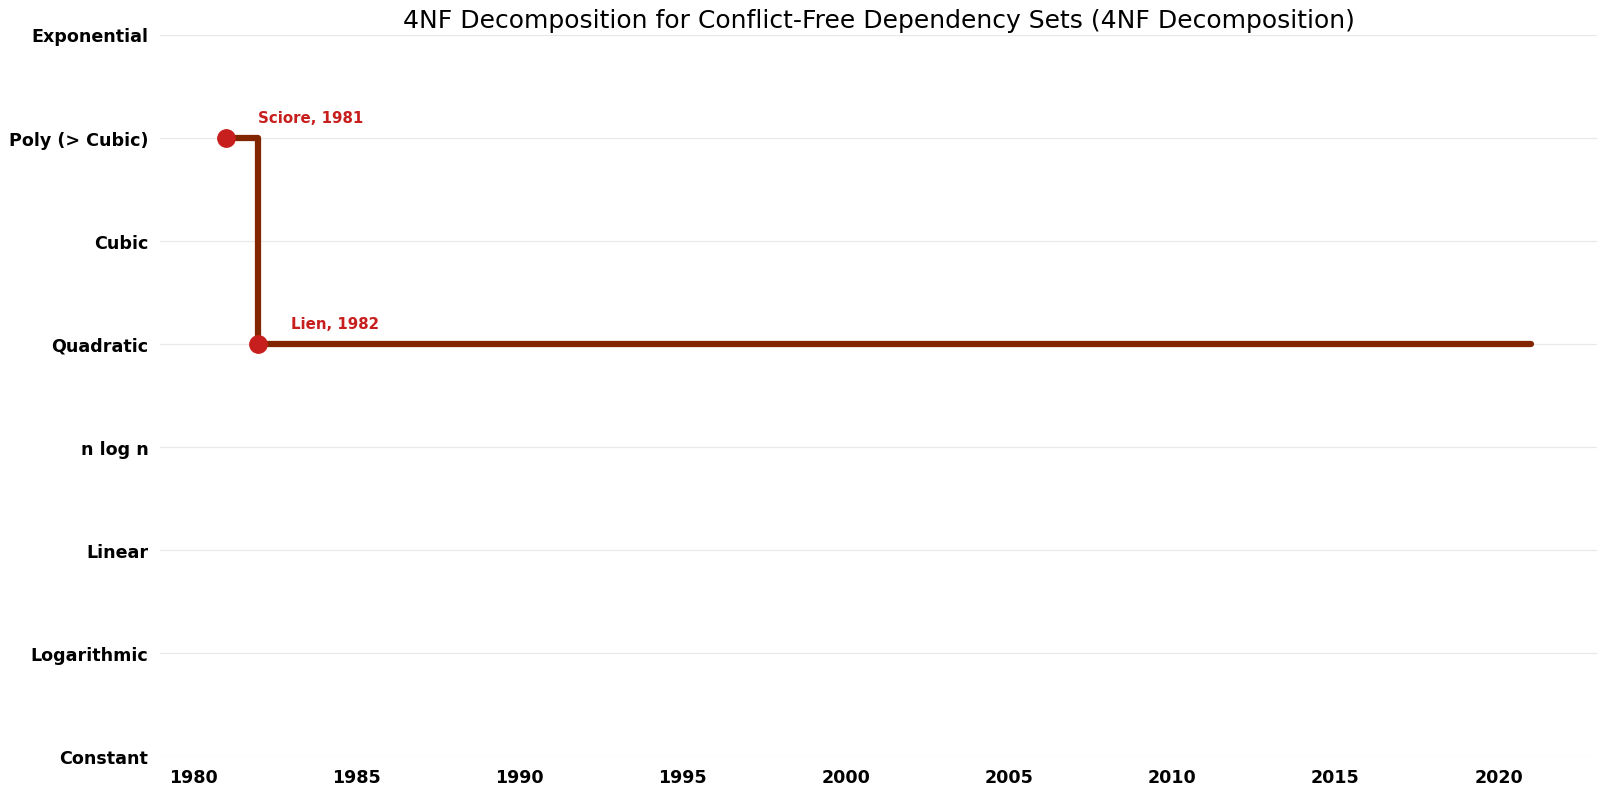 4NF Decomposition - 4NF Decomposition for Conflict-Free Dependency Sets - Time.png